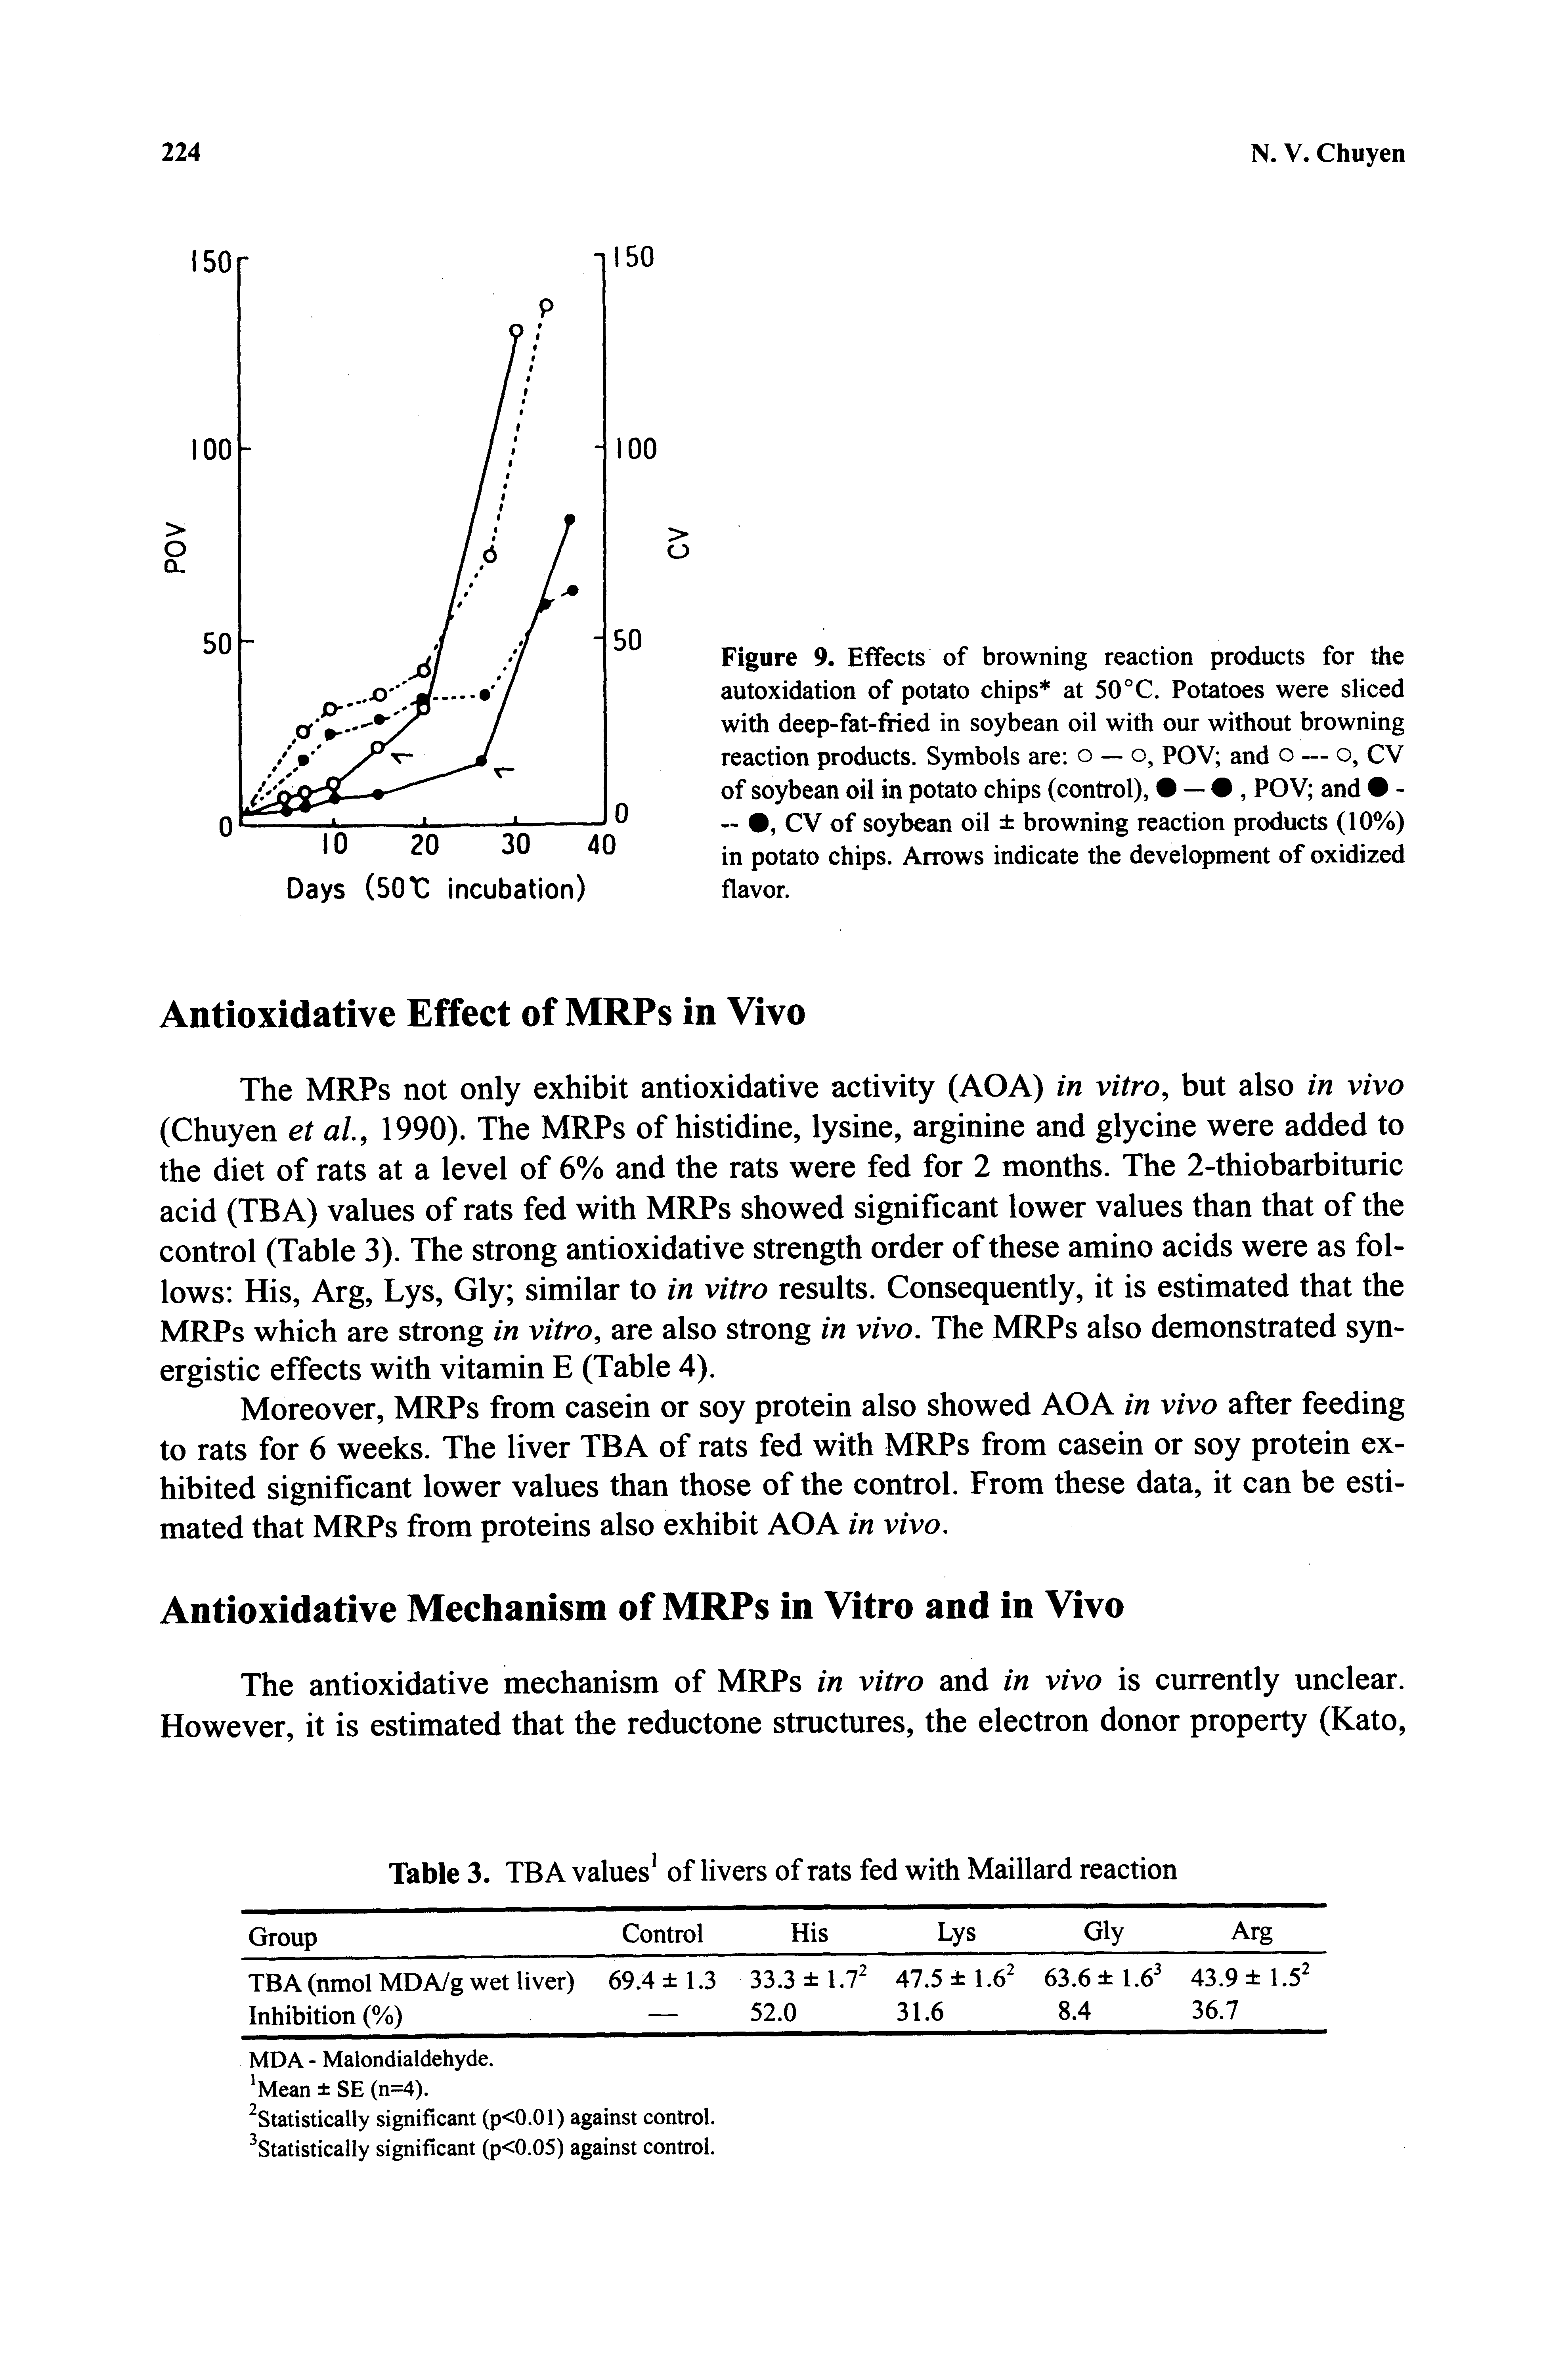 Figure 9. Effects of browning reaction products for the autoxidation of potato chips at 50°C. Potatoes were sliced with deep-fat-fried in soybean oil with our without browning reaction products. Symbols are o — o, POV and o — o, CV of soybean oil in potato chips (control), — , POV and -—, CV of soybean oil browning reaction products (10%) in potato chips. Arrows indicate the development of oxidized flavor.